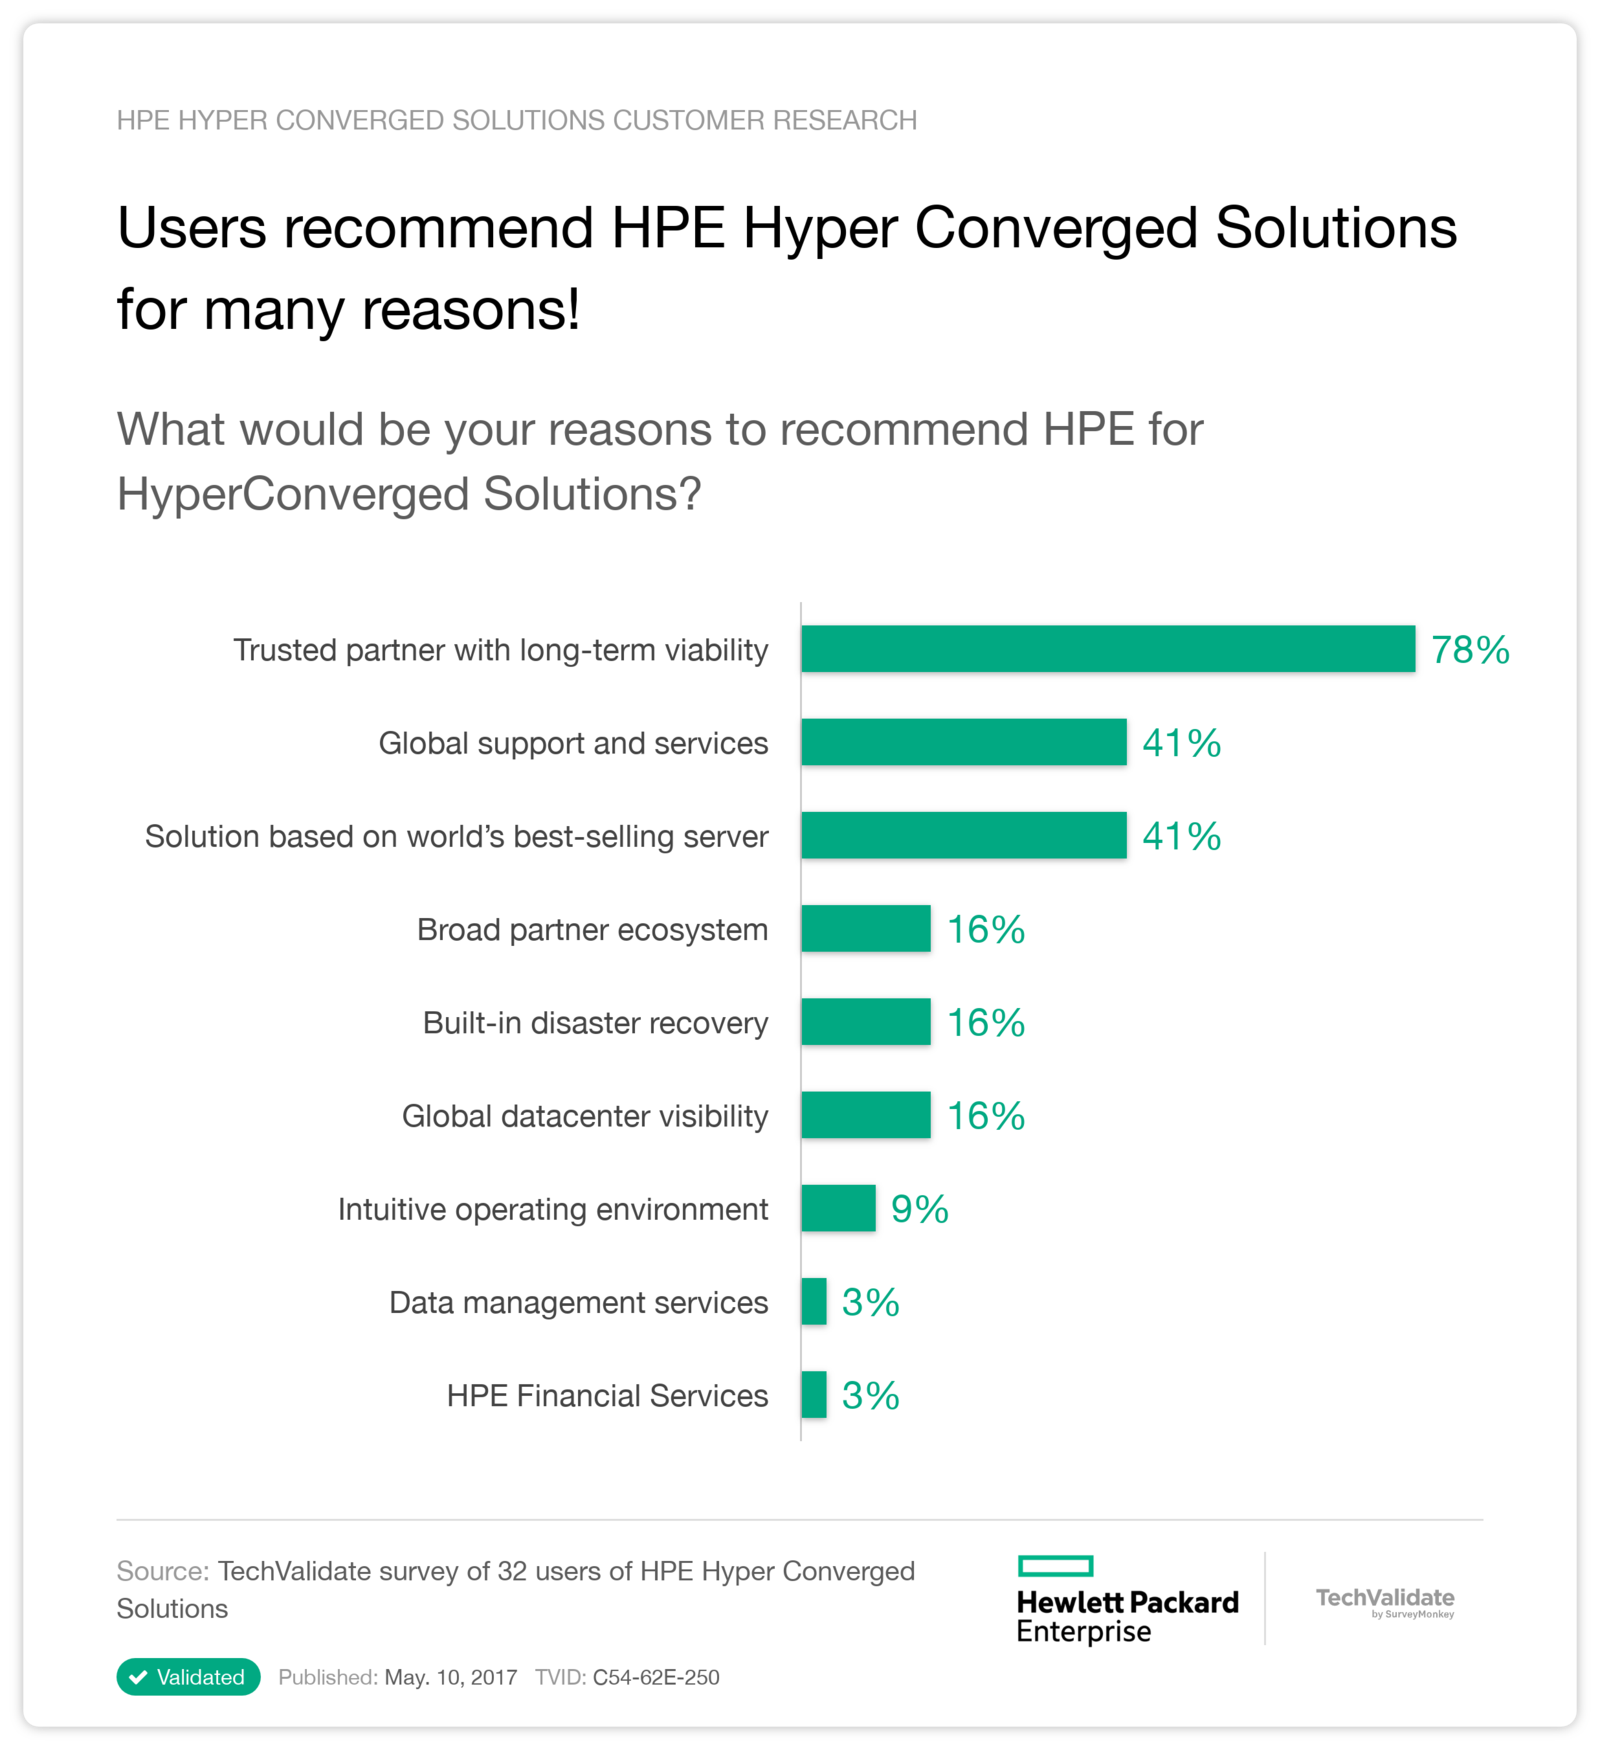 Users recommend HPE Hyper Converged Solutions for many reasons!